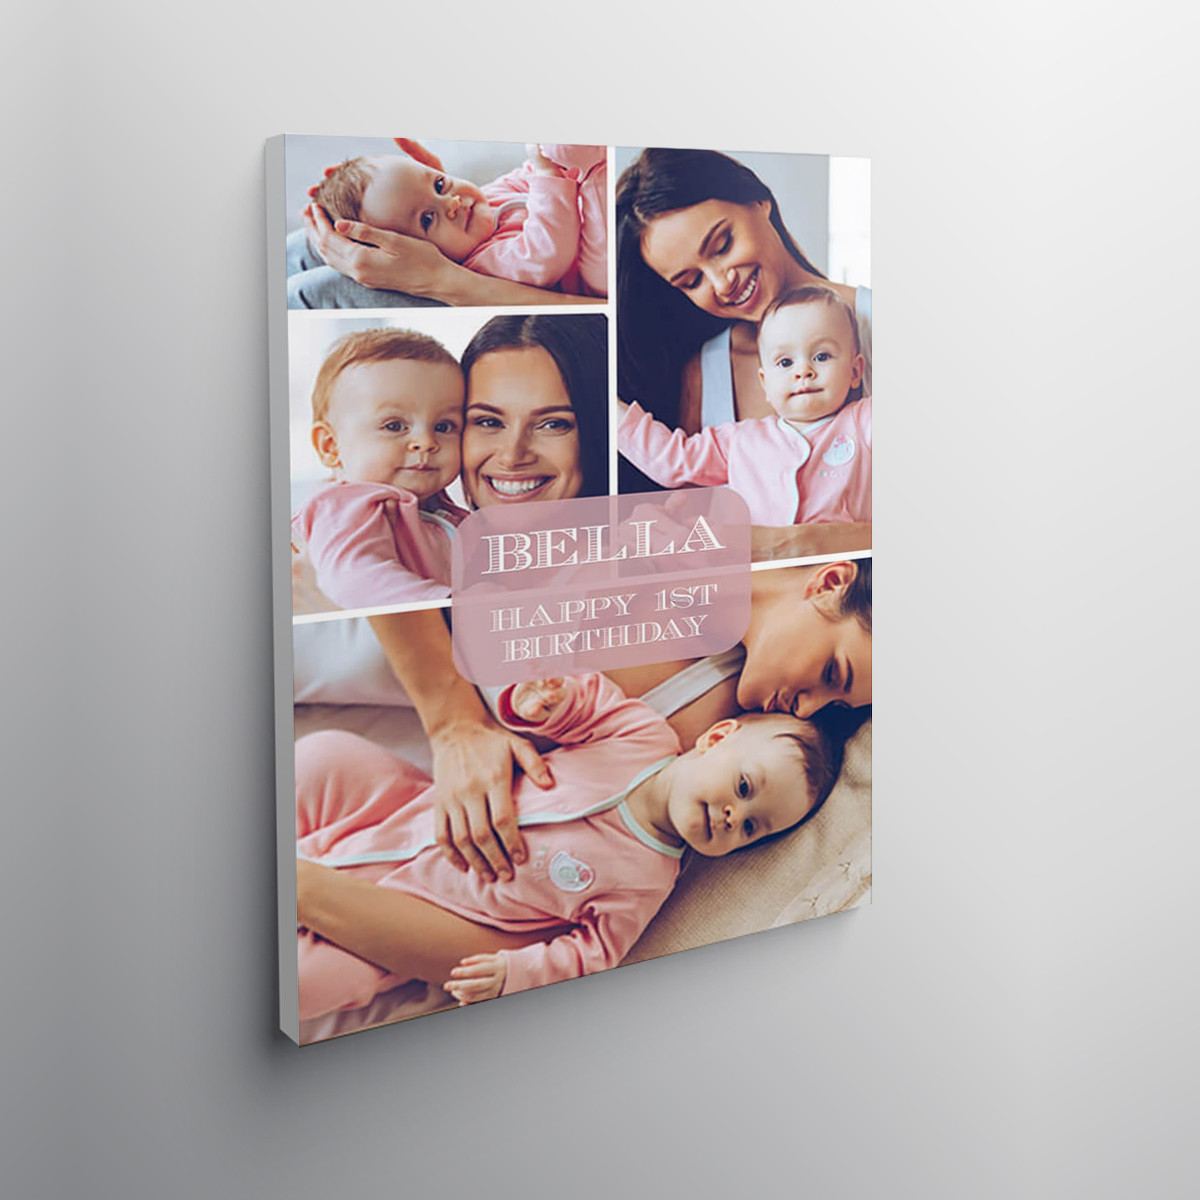 24x16" personalised New Baby Collage Canvas